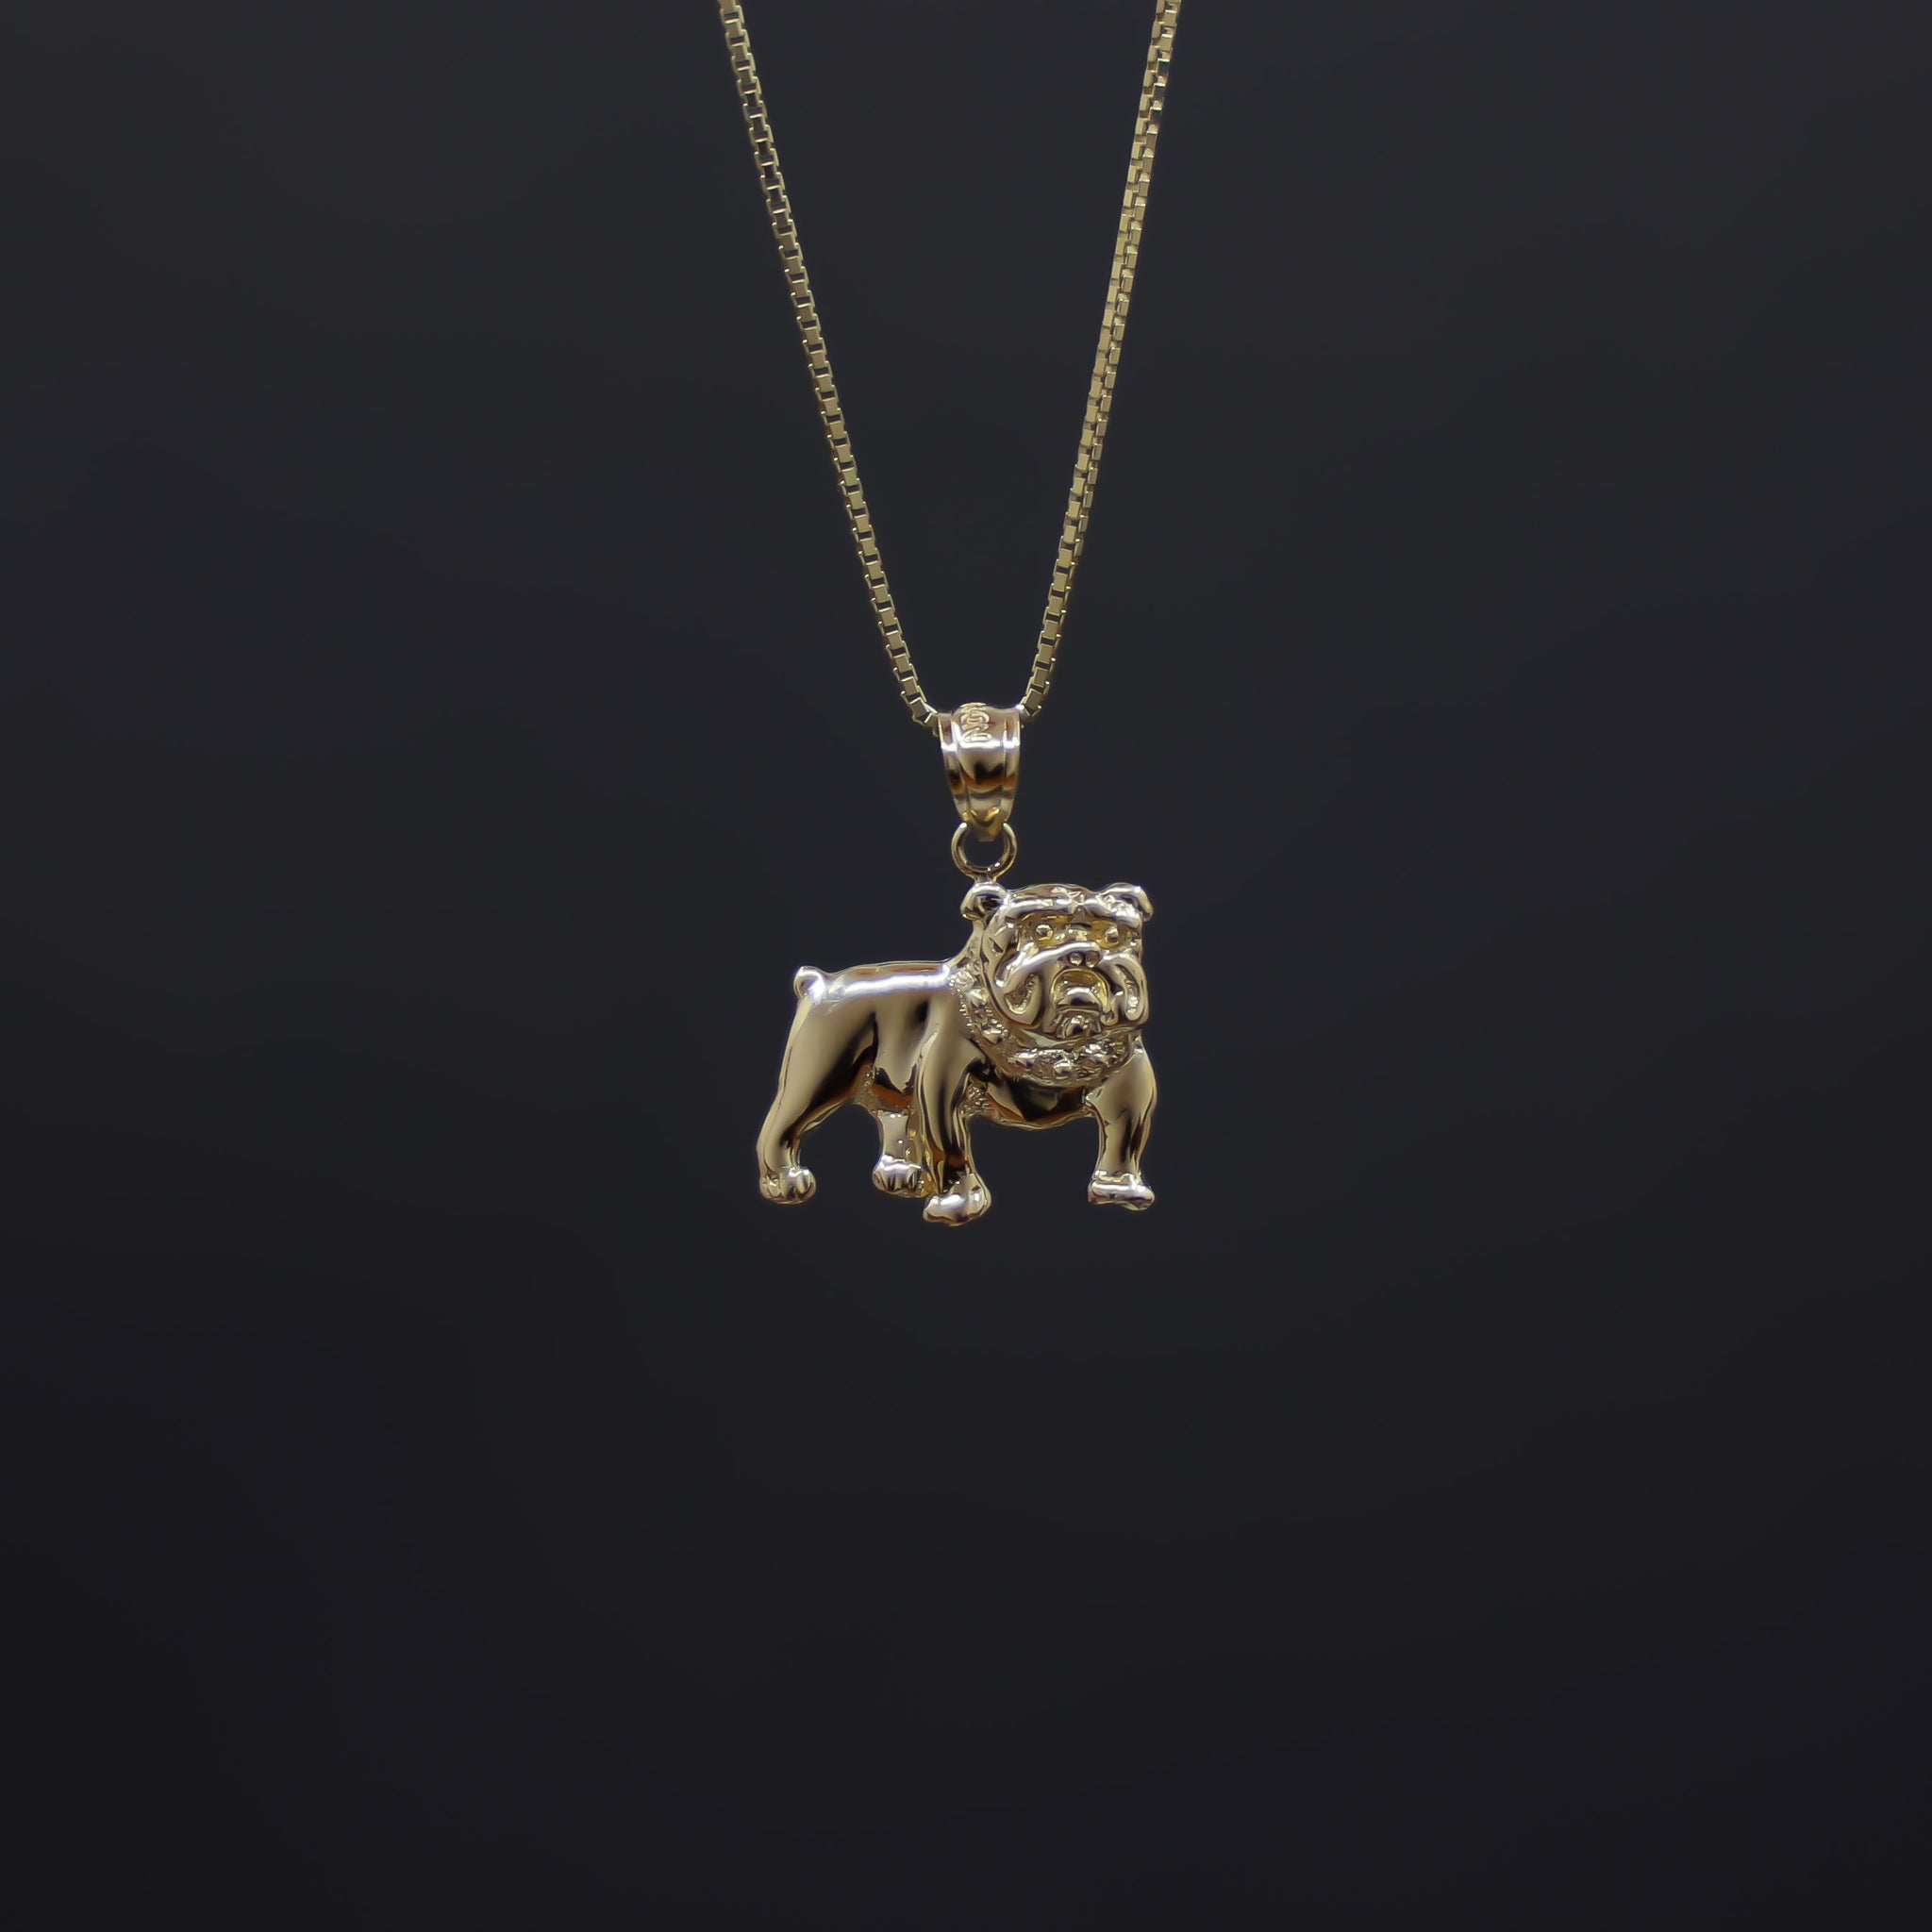 Cute French Bulldog Pendant Necklace - PetPulse's Ko-fi Shop - Ko-fi ❤️  Where creators get support from fans through donations, memberships, shop  sales and more! The original 'Buy Me a Coffee' Page.